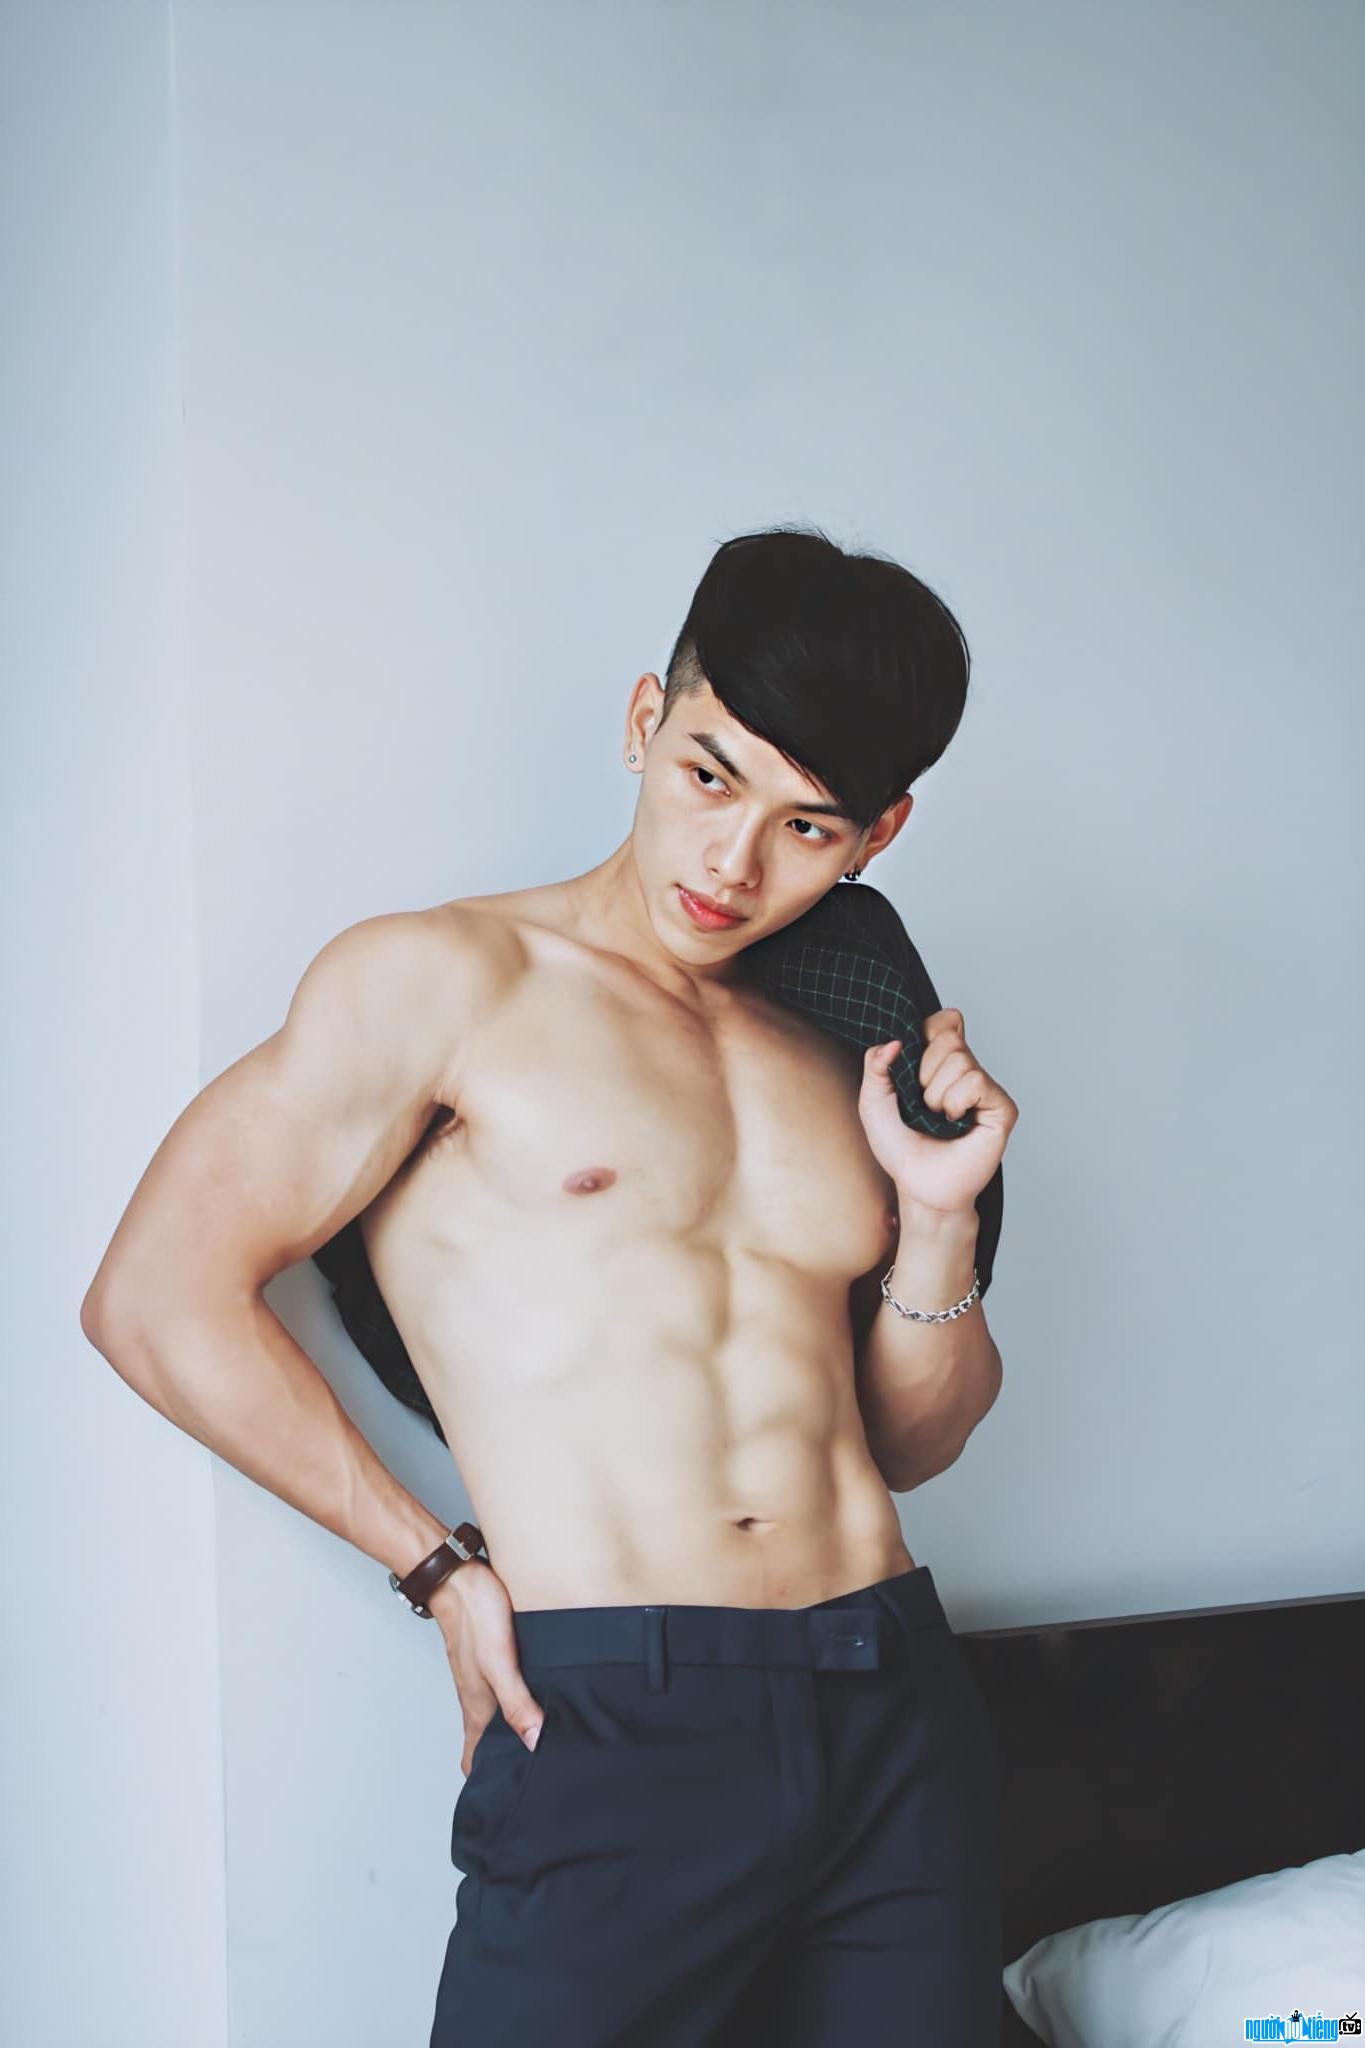  Tran Tuan Anh shows off his hot 6-pack body